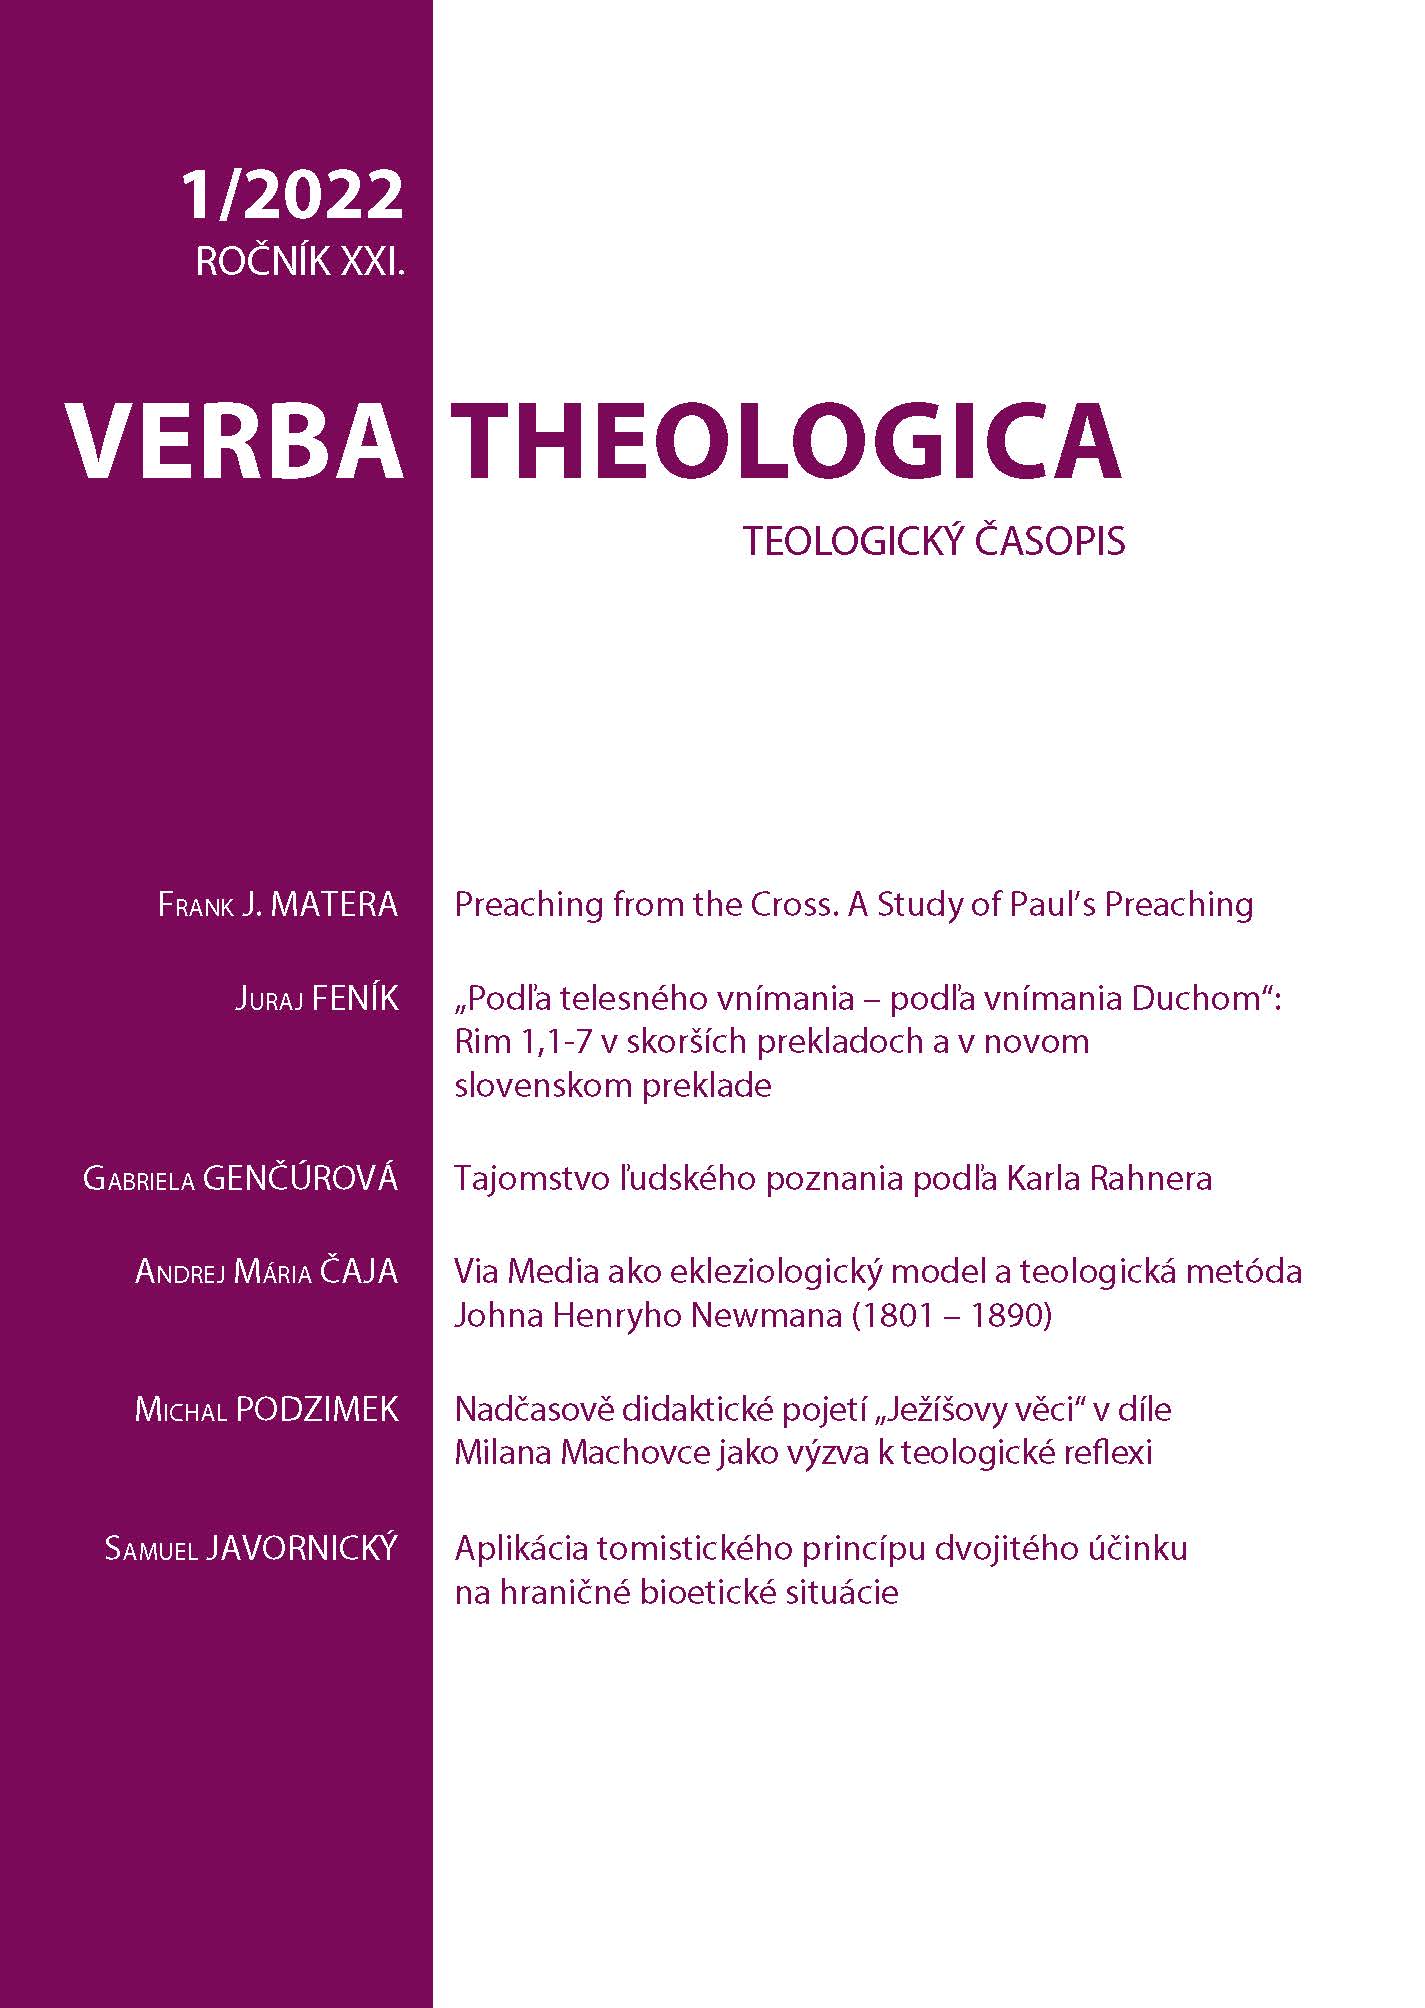 „According to the Perception through the Flesh – According to the Perception Mediated by the Spirit“: Rom 1,1-7 in Bible Translations and in a New Slovak Translation Cover Image